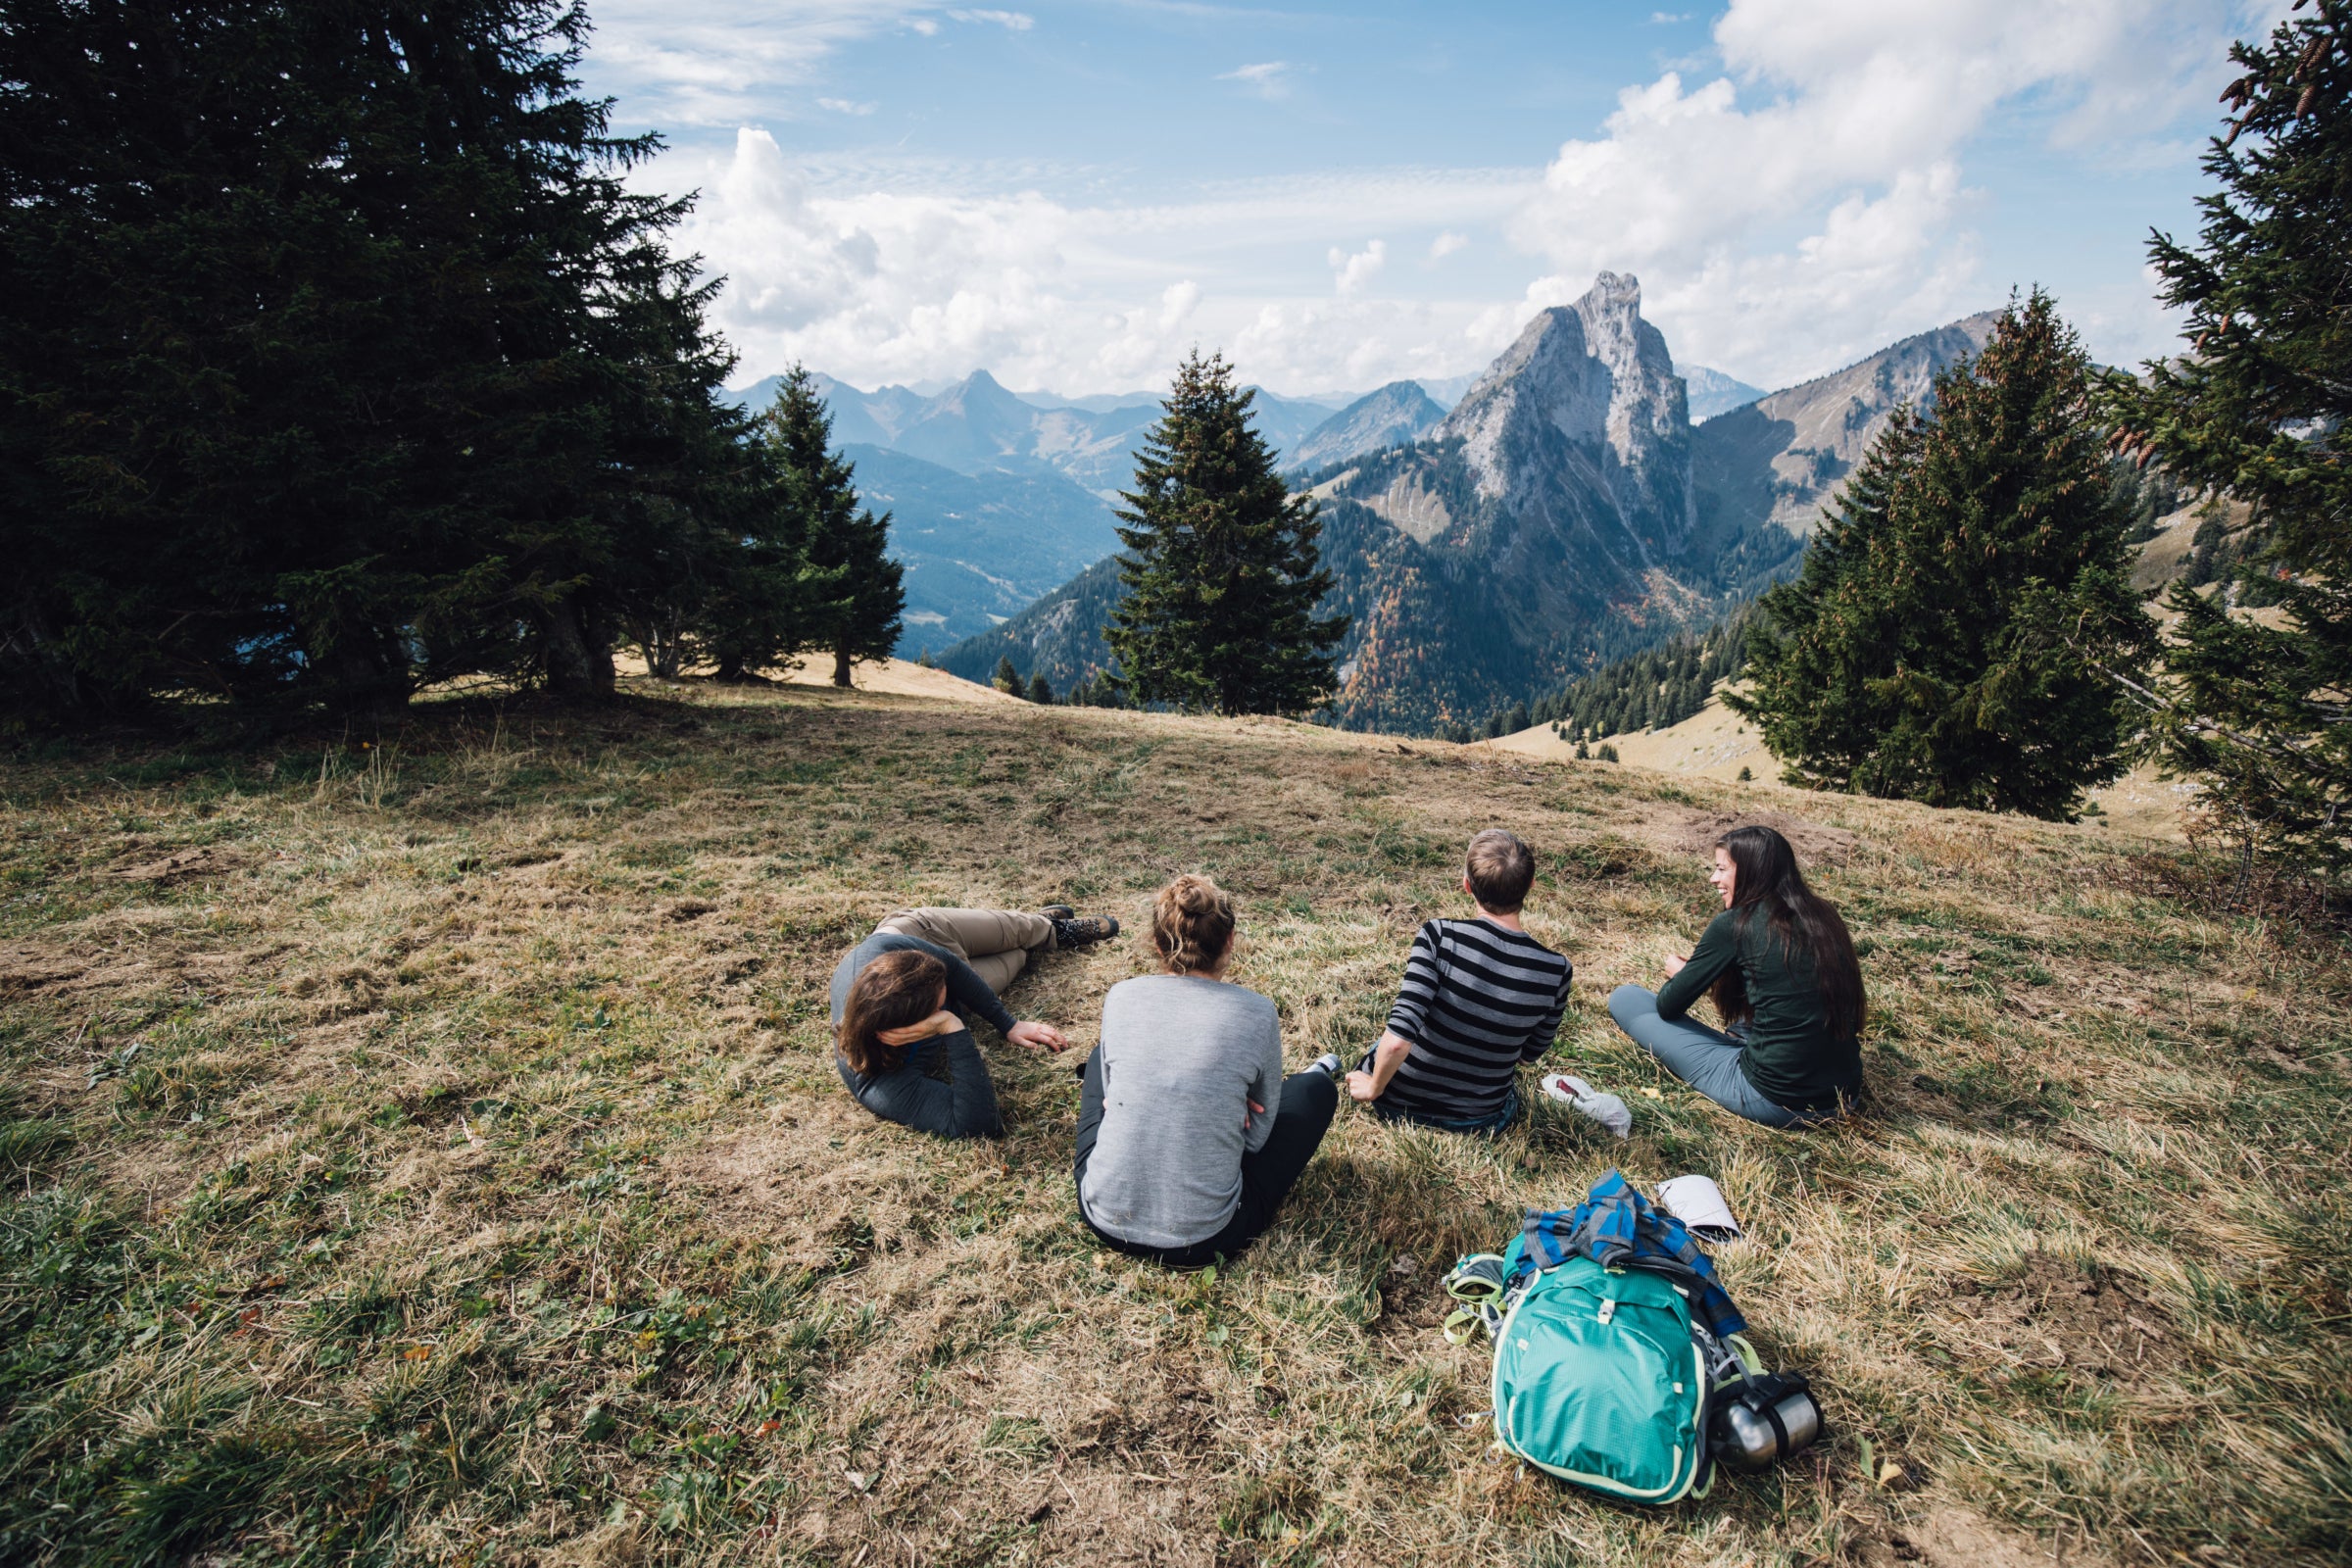 Four friends enjoying a serene mountain view, dressed in comfortable Isobaa merino wool clothing, with a backpack resting on the grass beside them